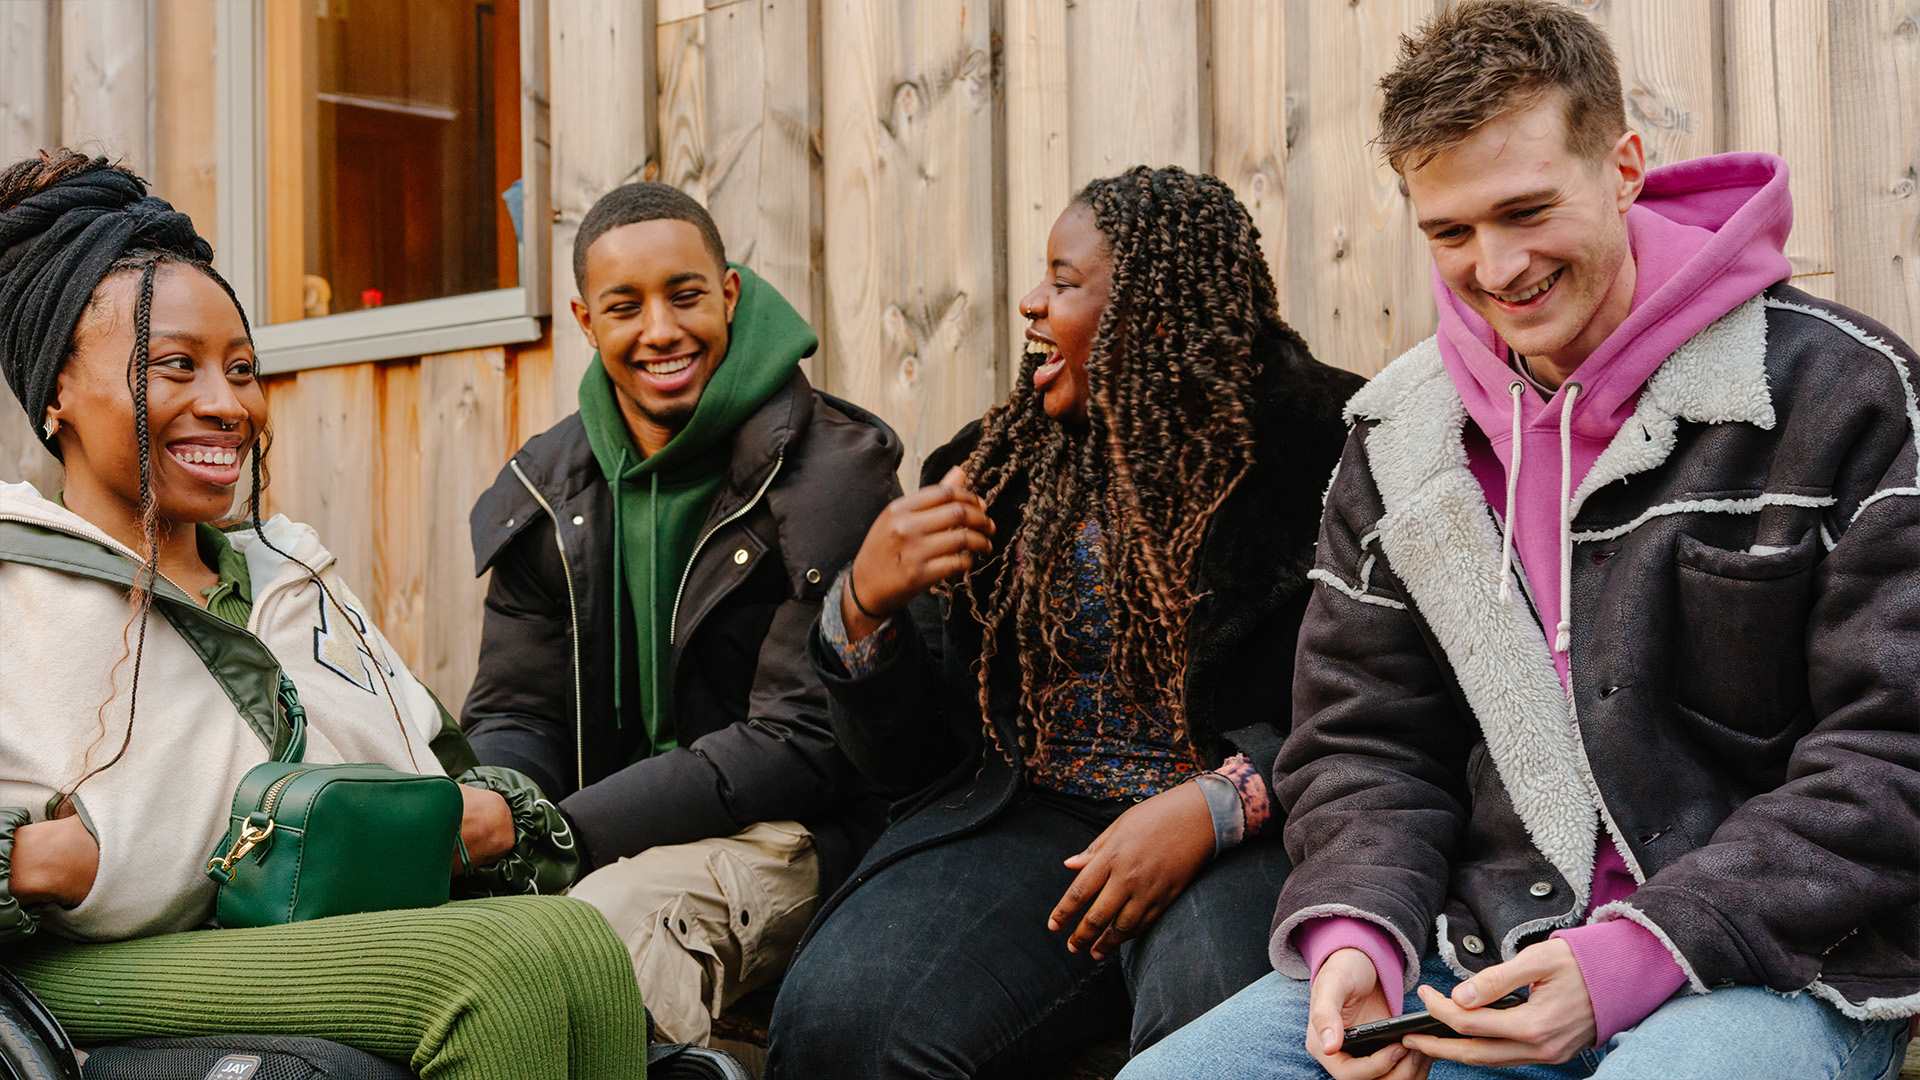 A group of young people laughing together outside on a bench. Group includes two black girls (one in a wheelchair), one black boy, and a white boy.